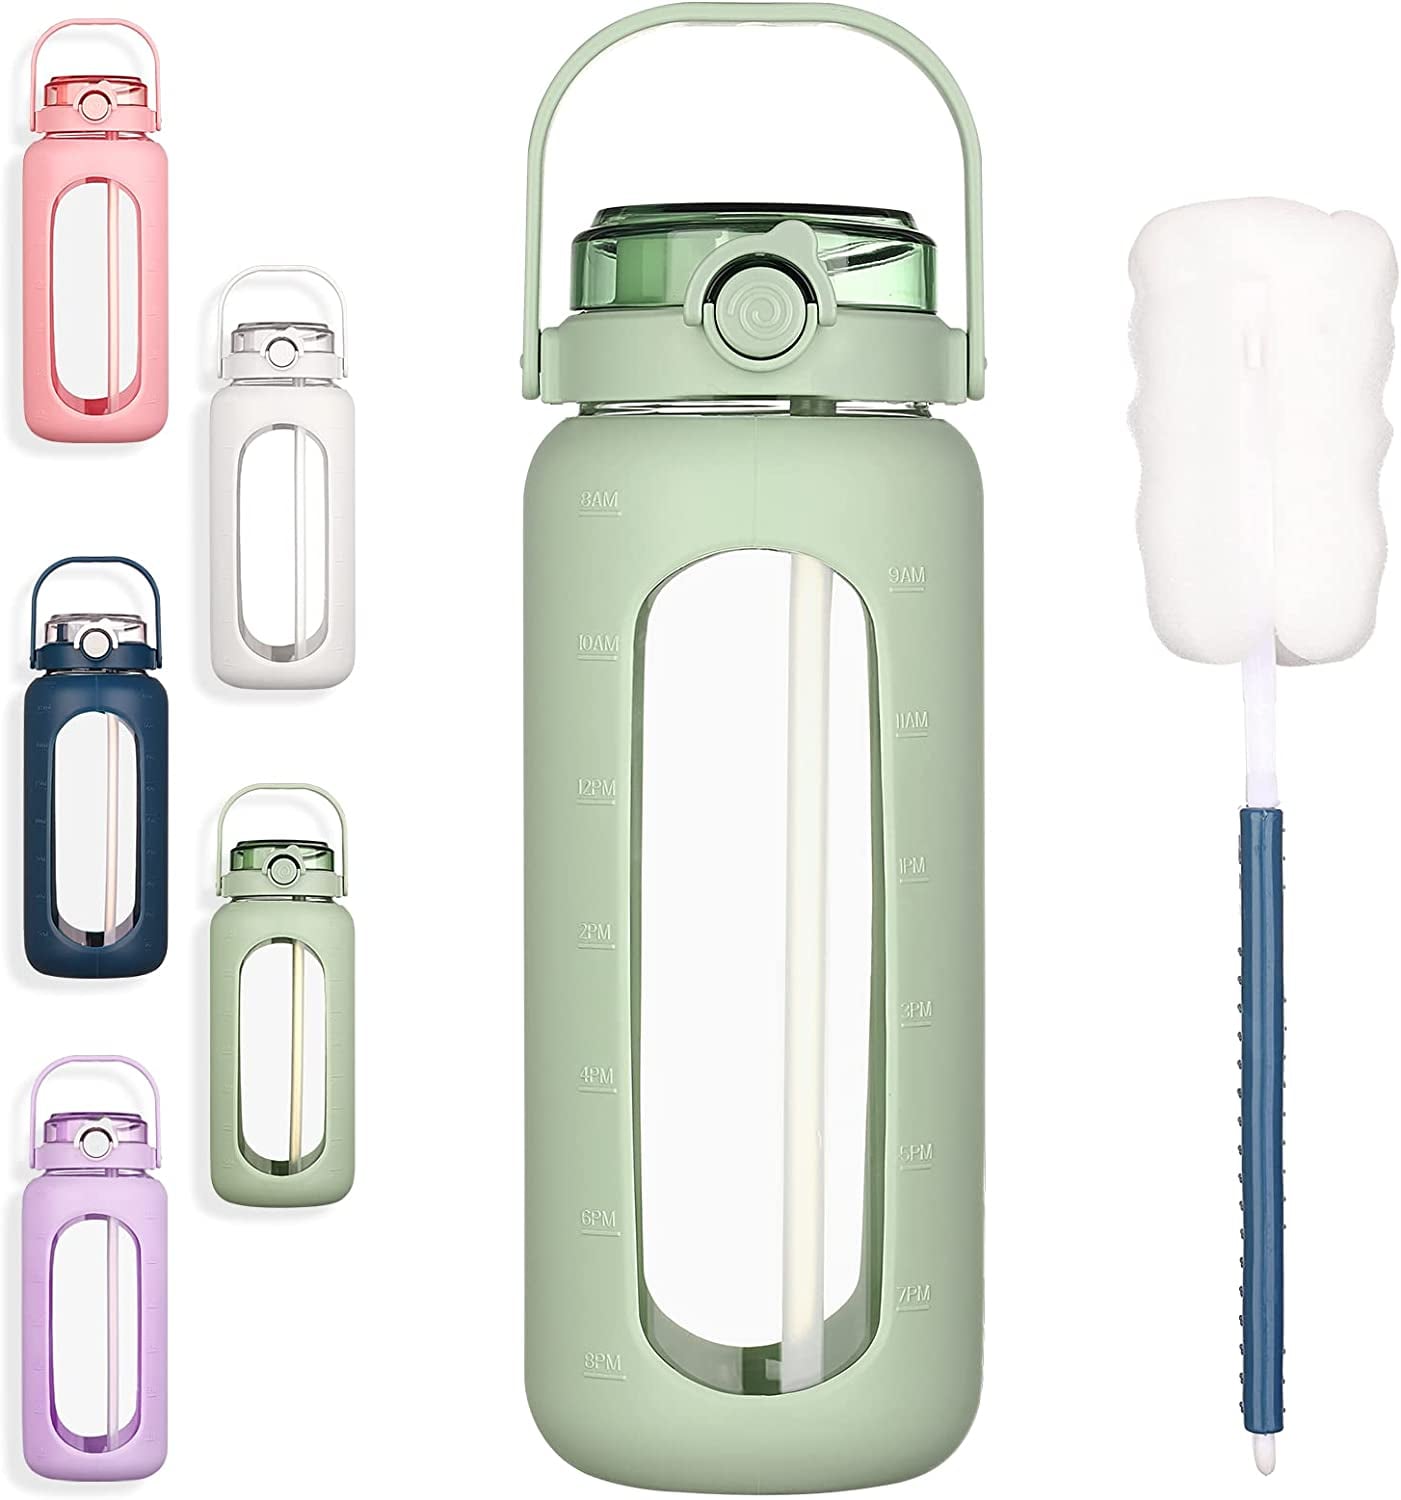 Keep Your Team Hydrated With Swing-Top Glass Water Bottles